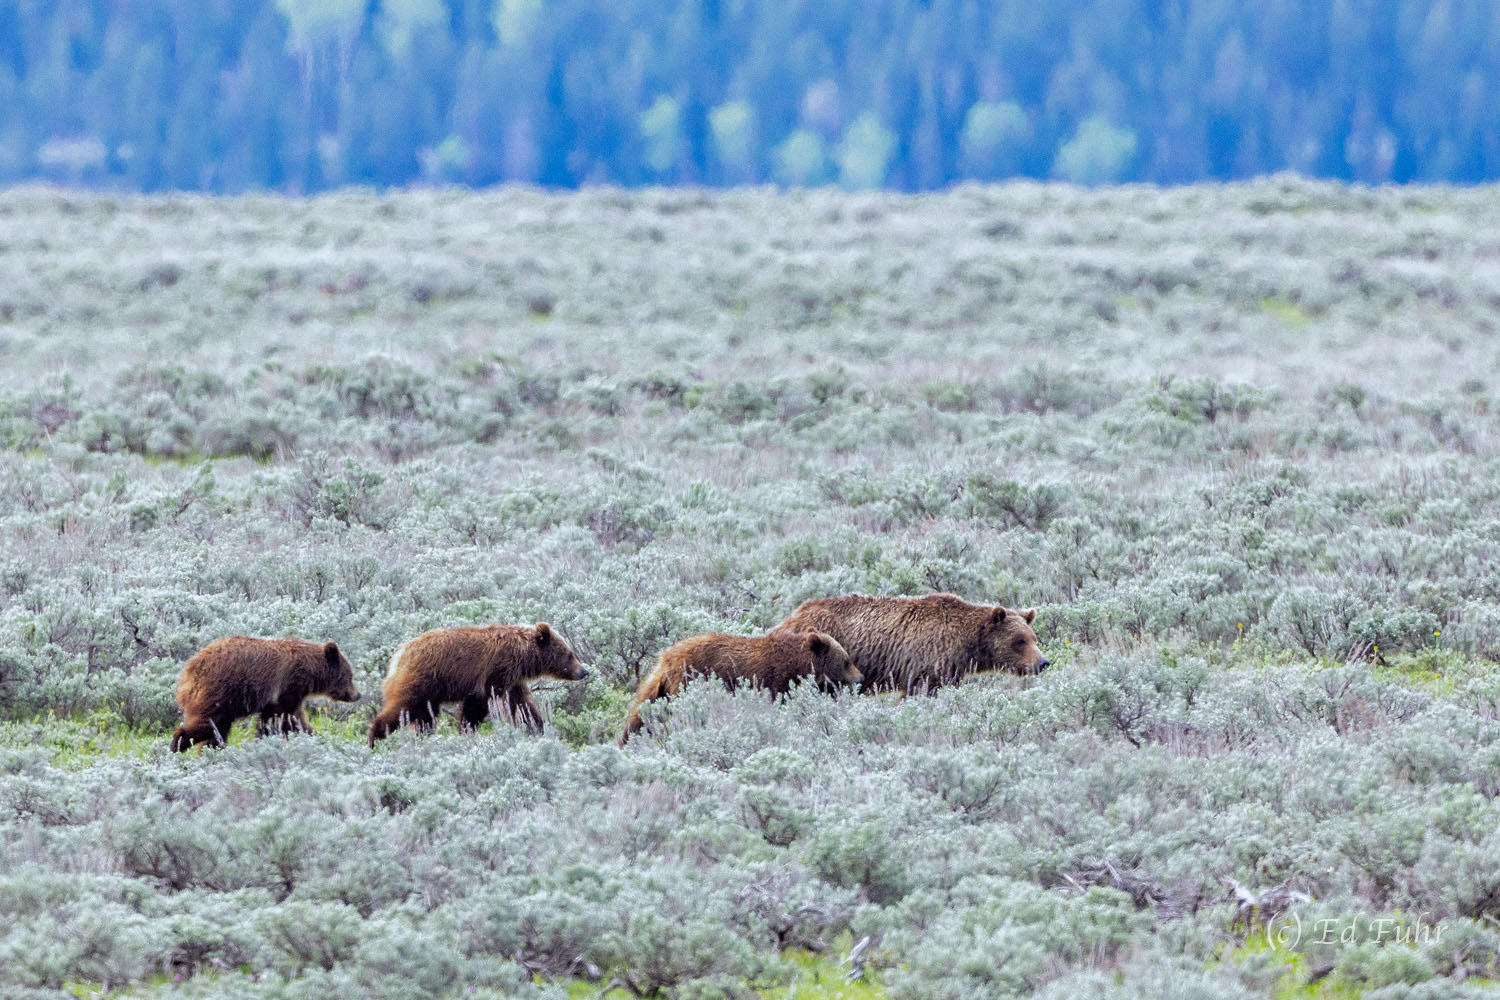 Grizzly 610 leads her family of three cubs across the large open sage flats.